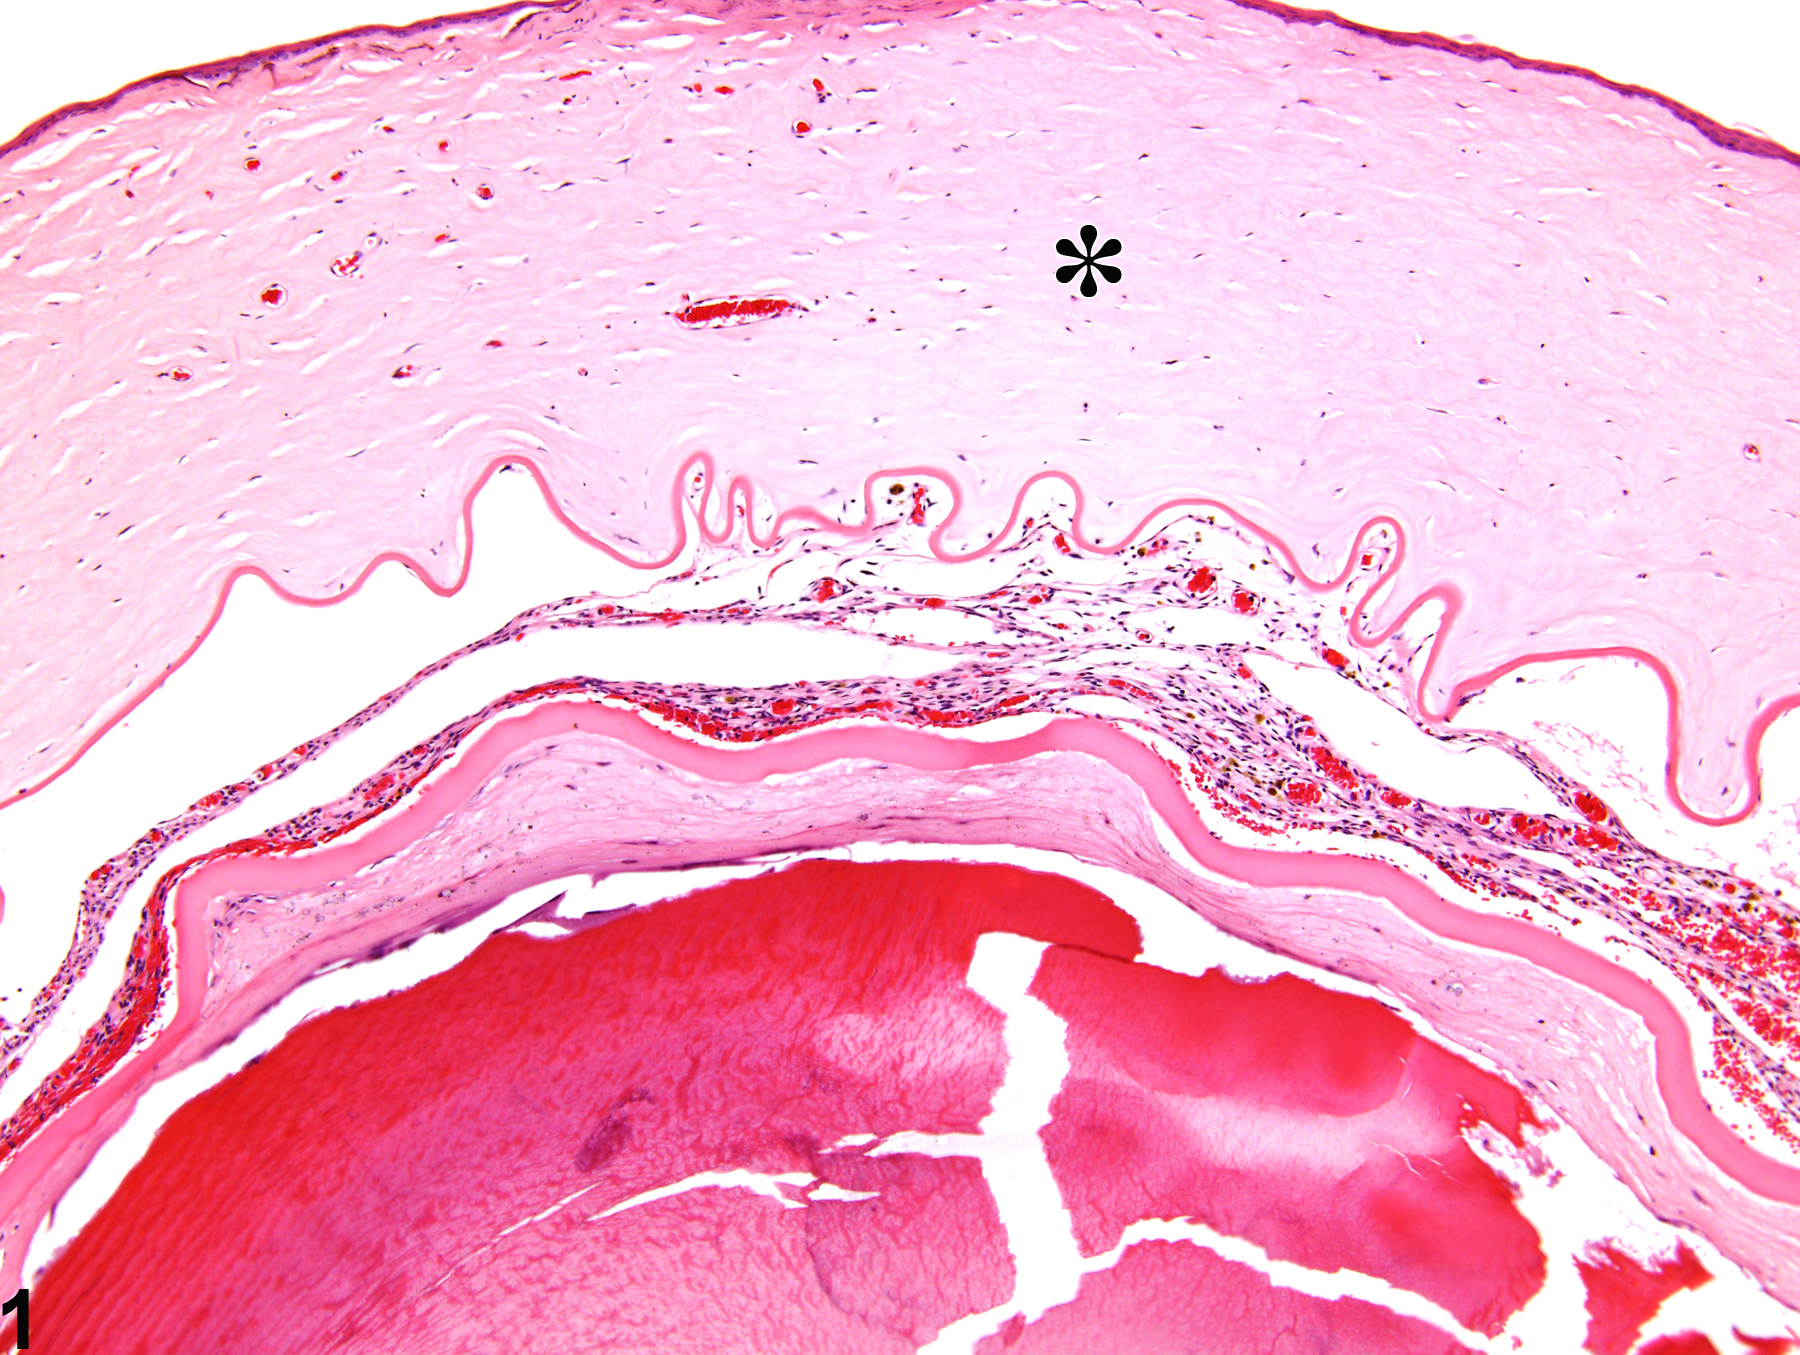 Image of cornea edema in the eye from a female F344/N rat in a chronic study